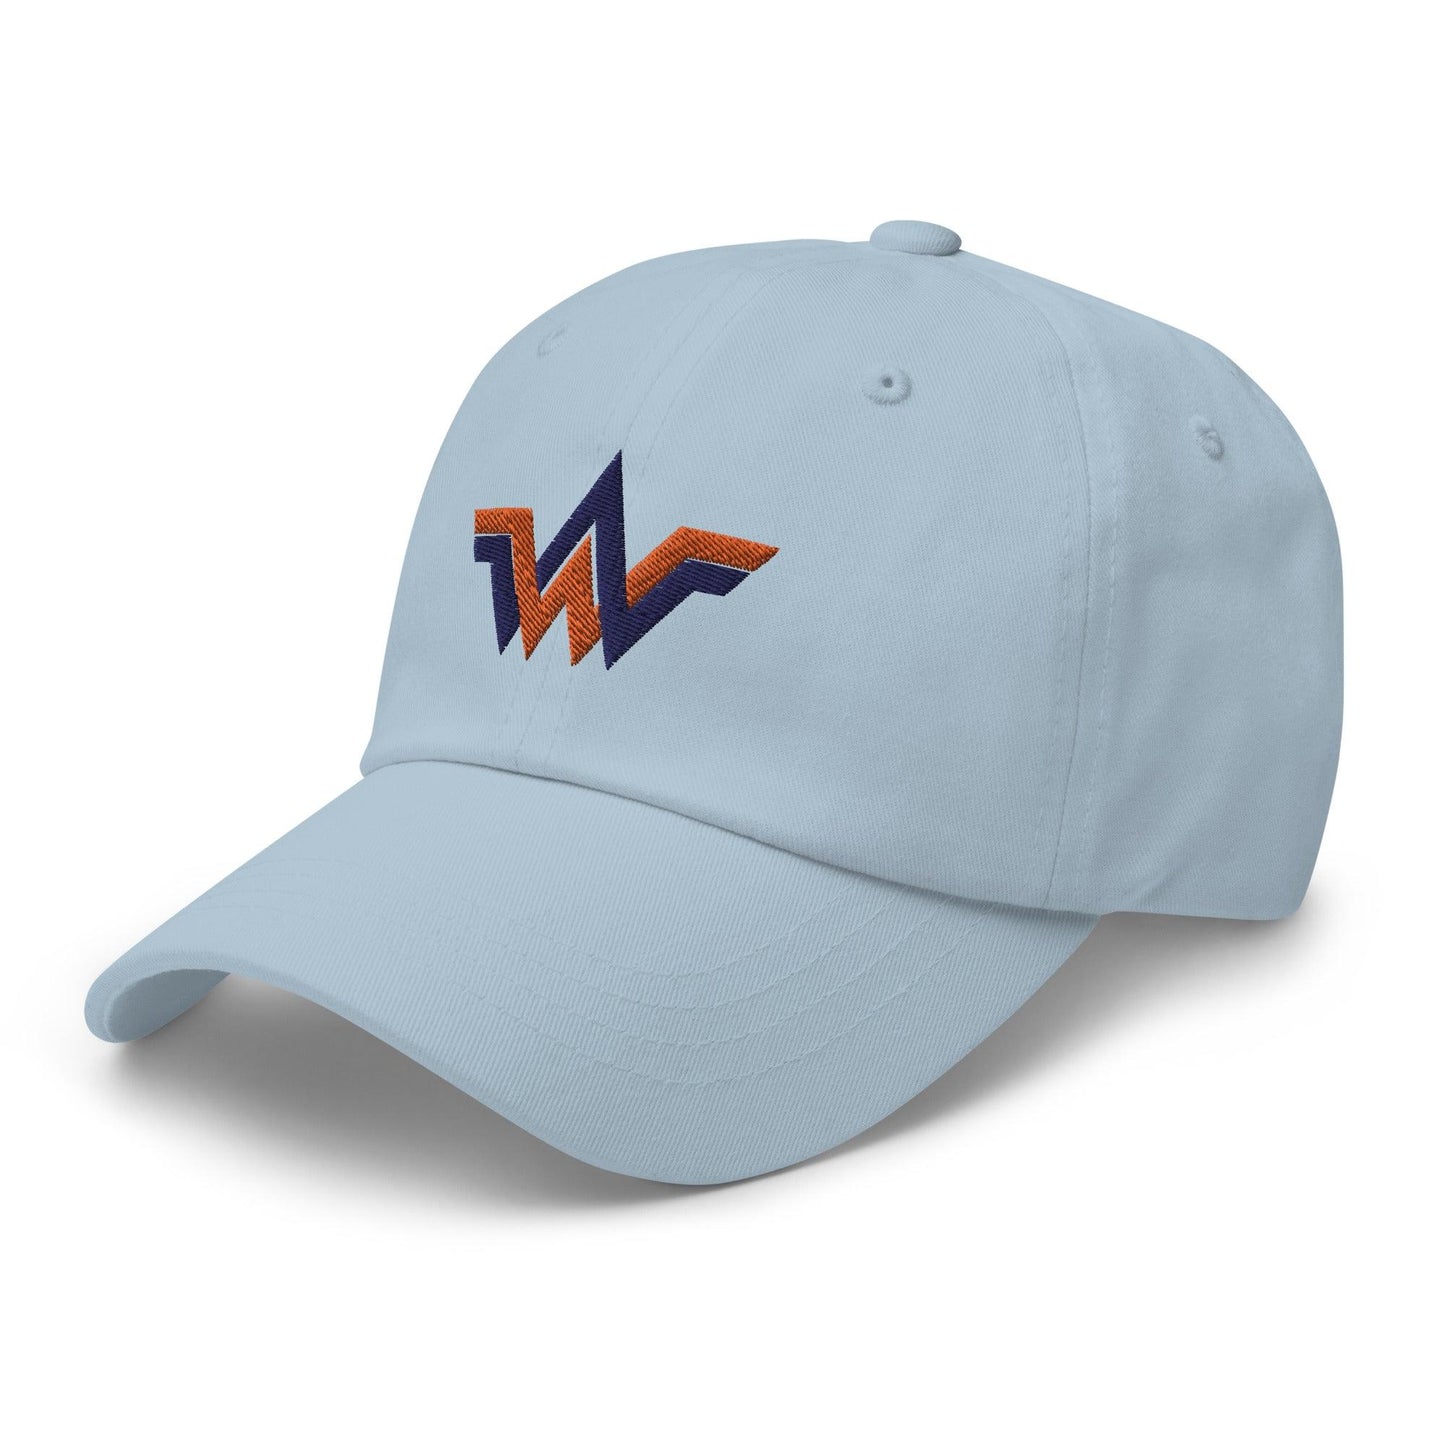 Will Wagner "Signature" hat - Fan Arch